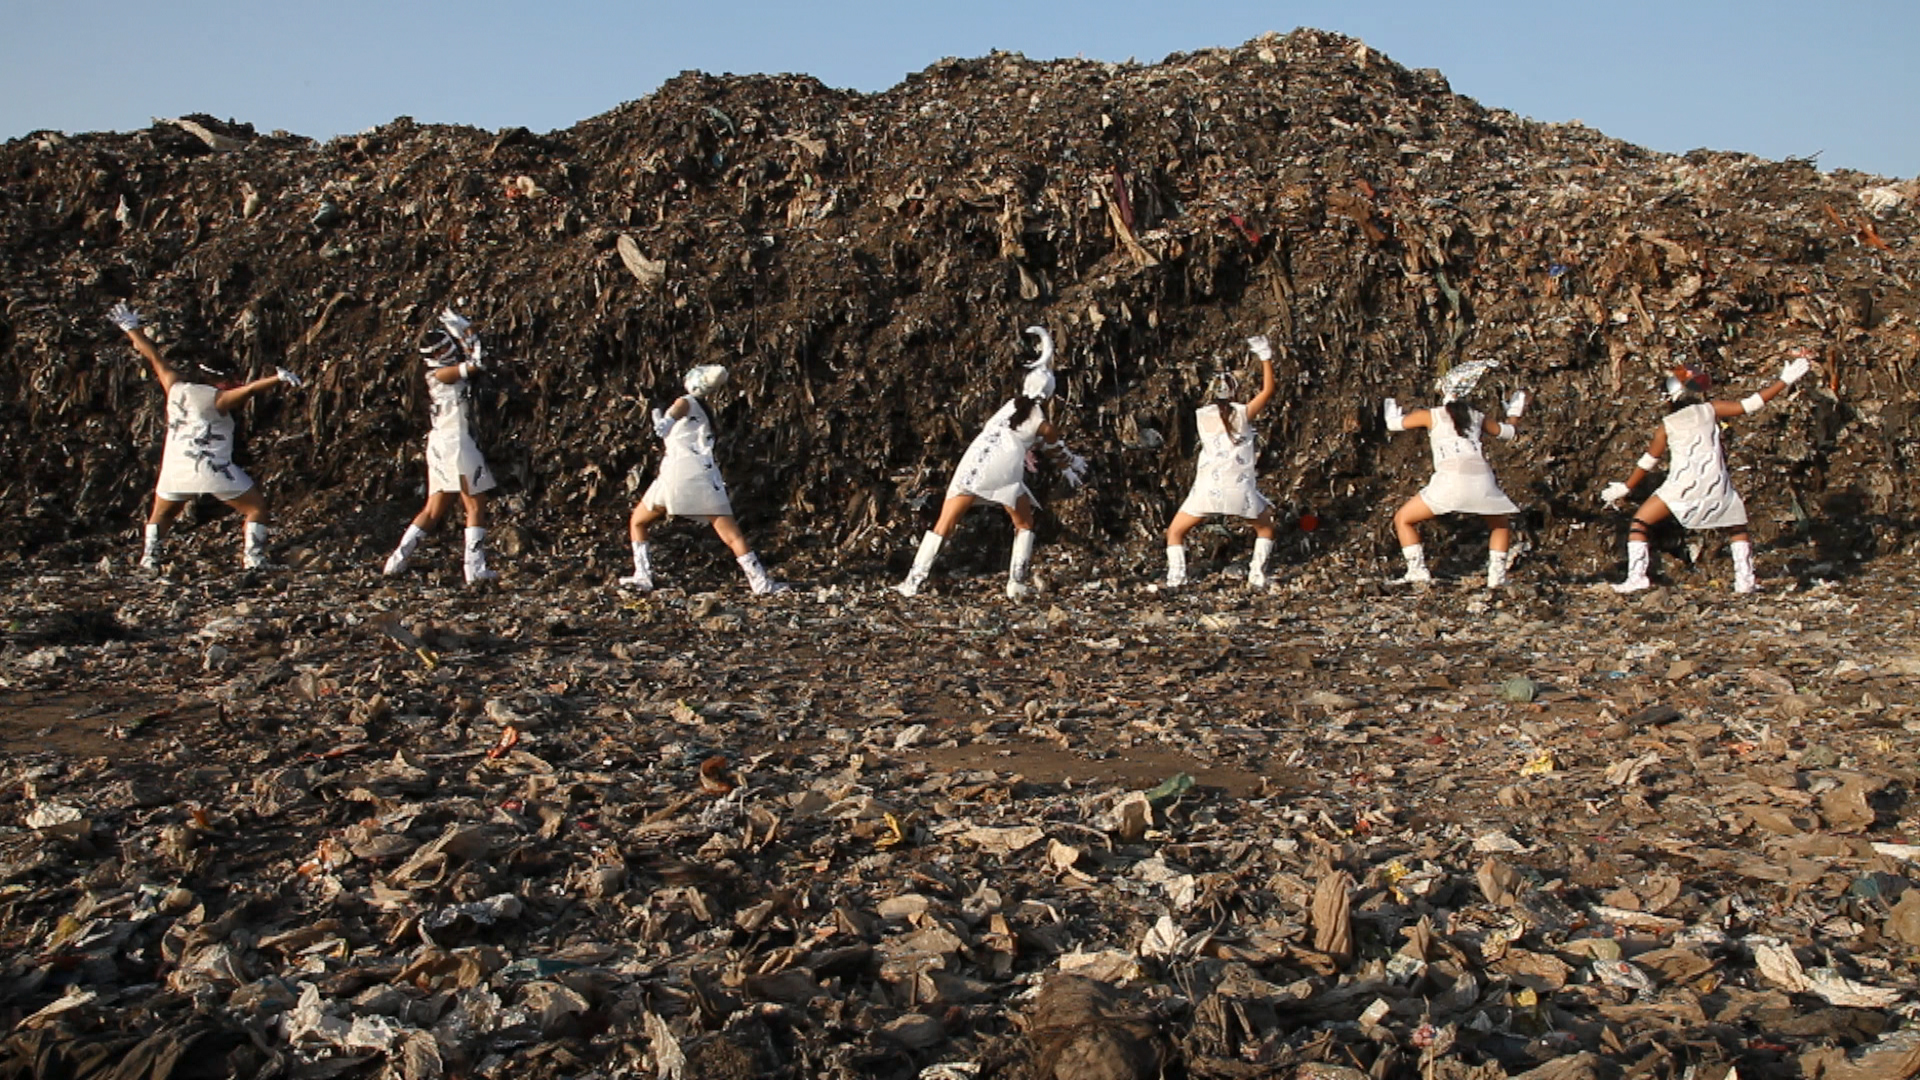 Tejal Shah, 'Between the Waves, Channel II - Landfill Dance' (still), 2012.